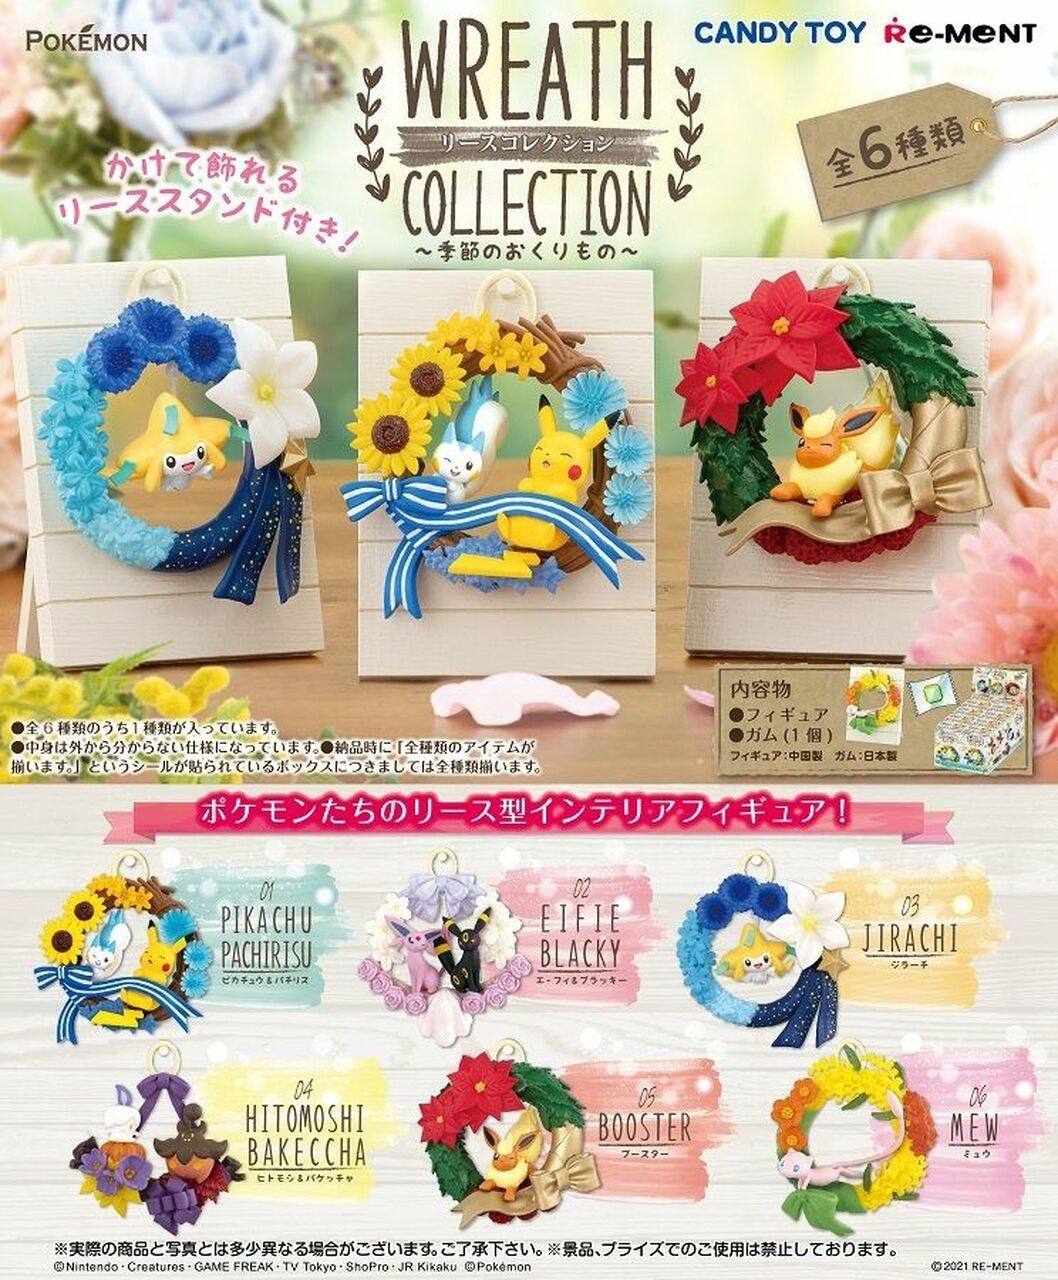 Re-ment Pokemon Wreath Collection: Seasonal Gifts Blind Box